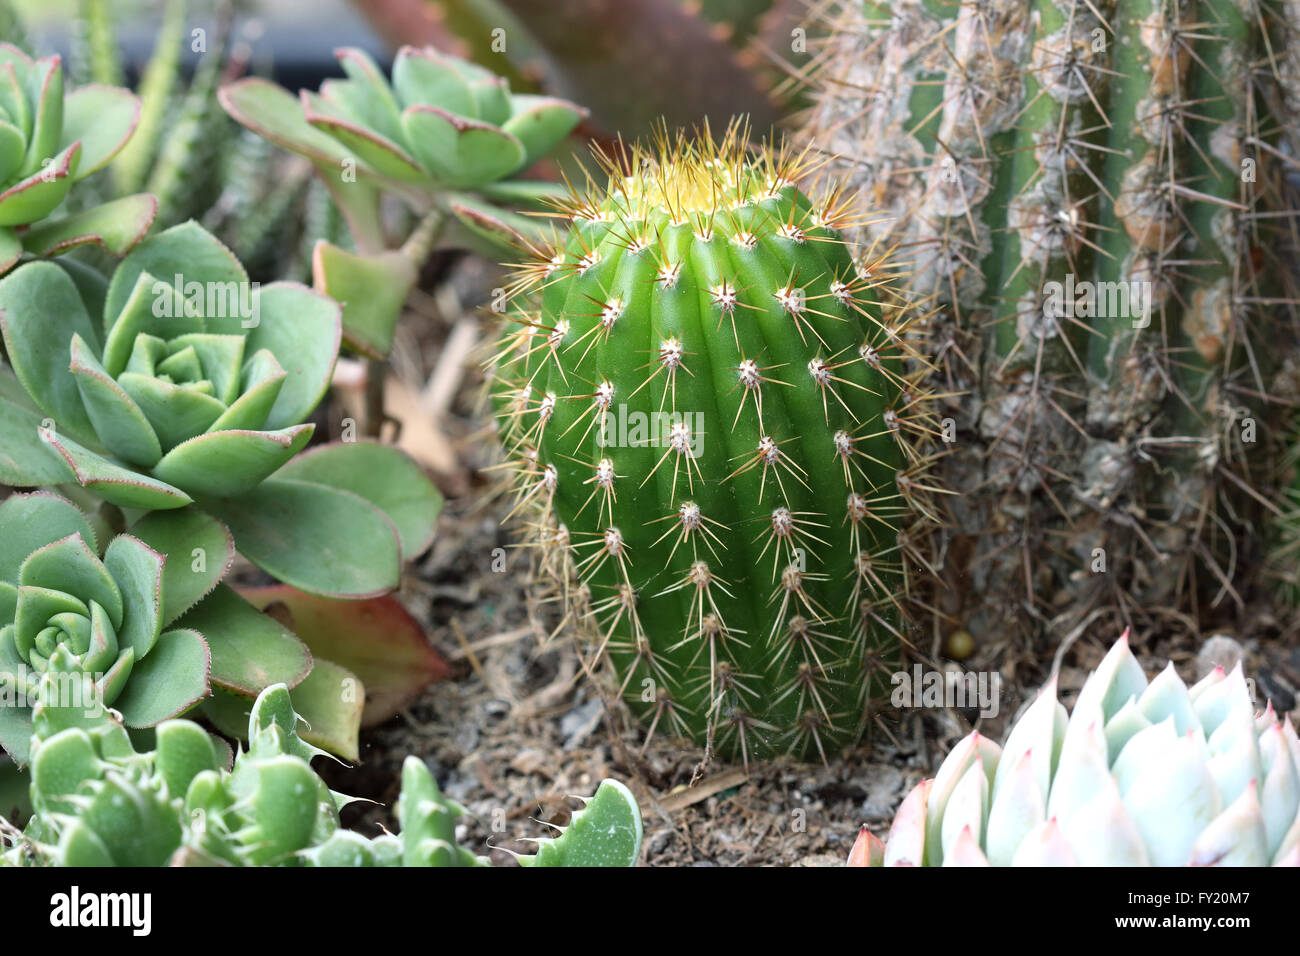 Close up of Varieties of cactus and succulents Stock Photo